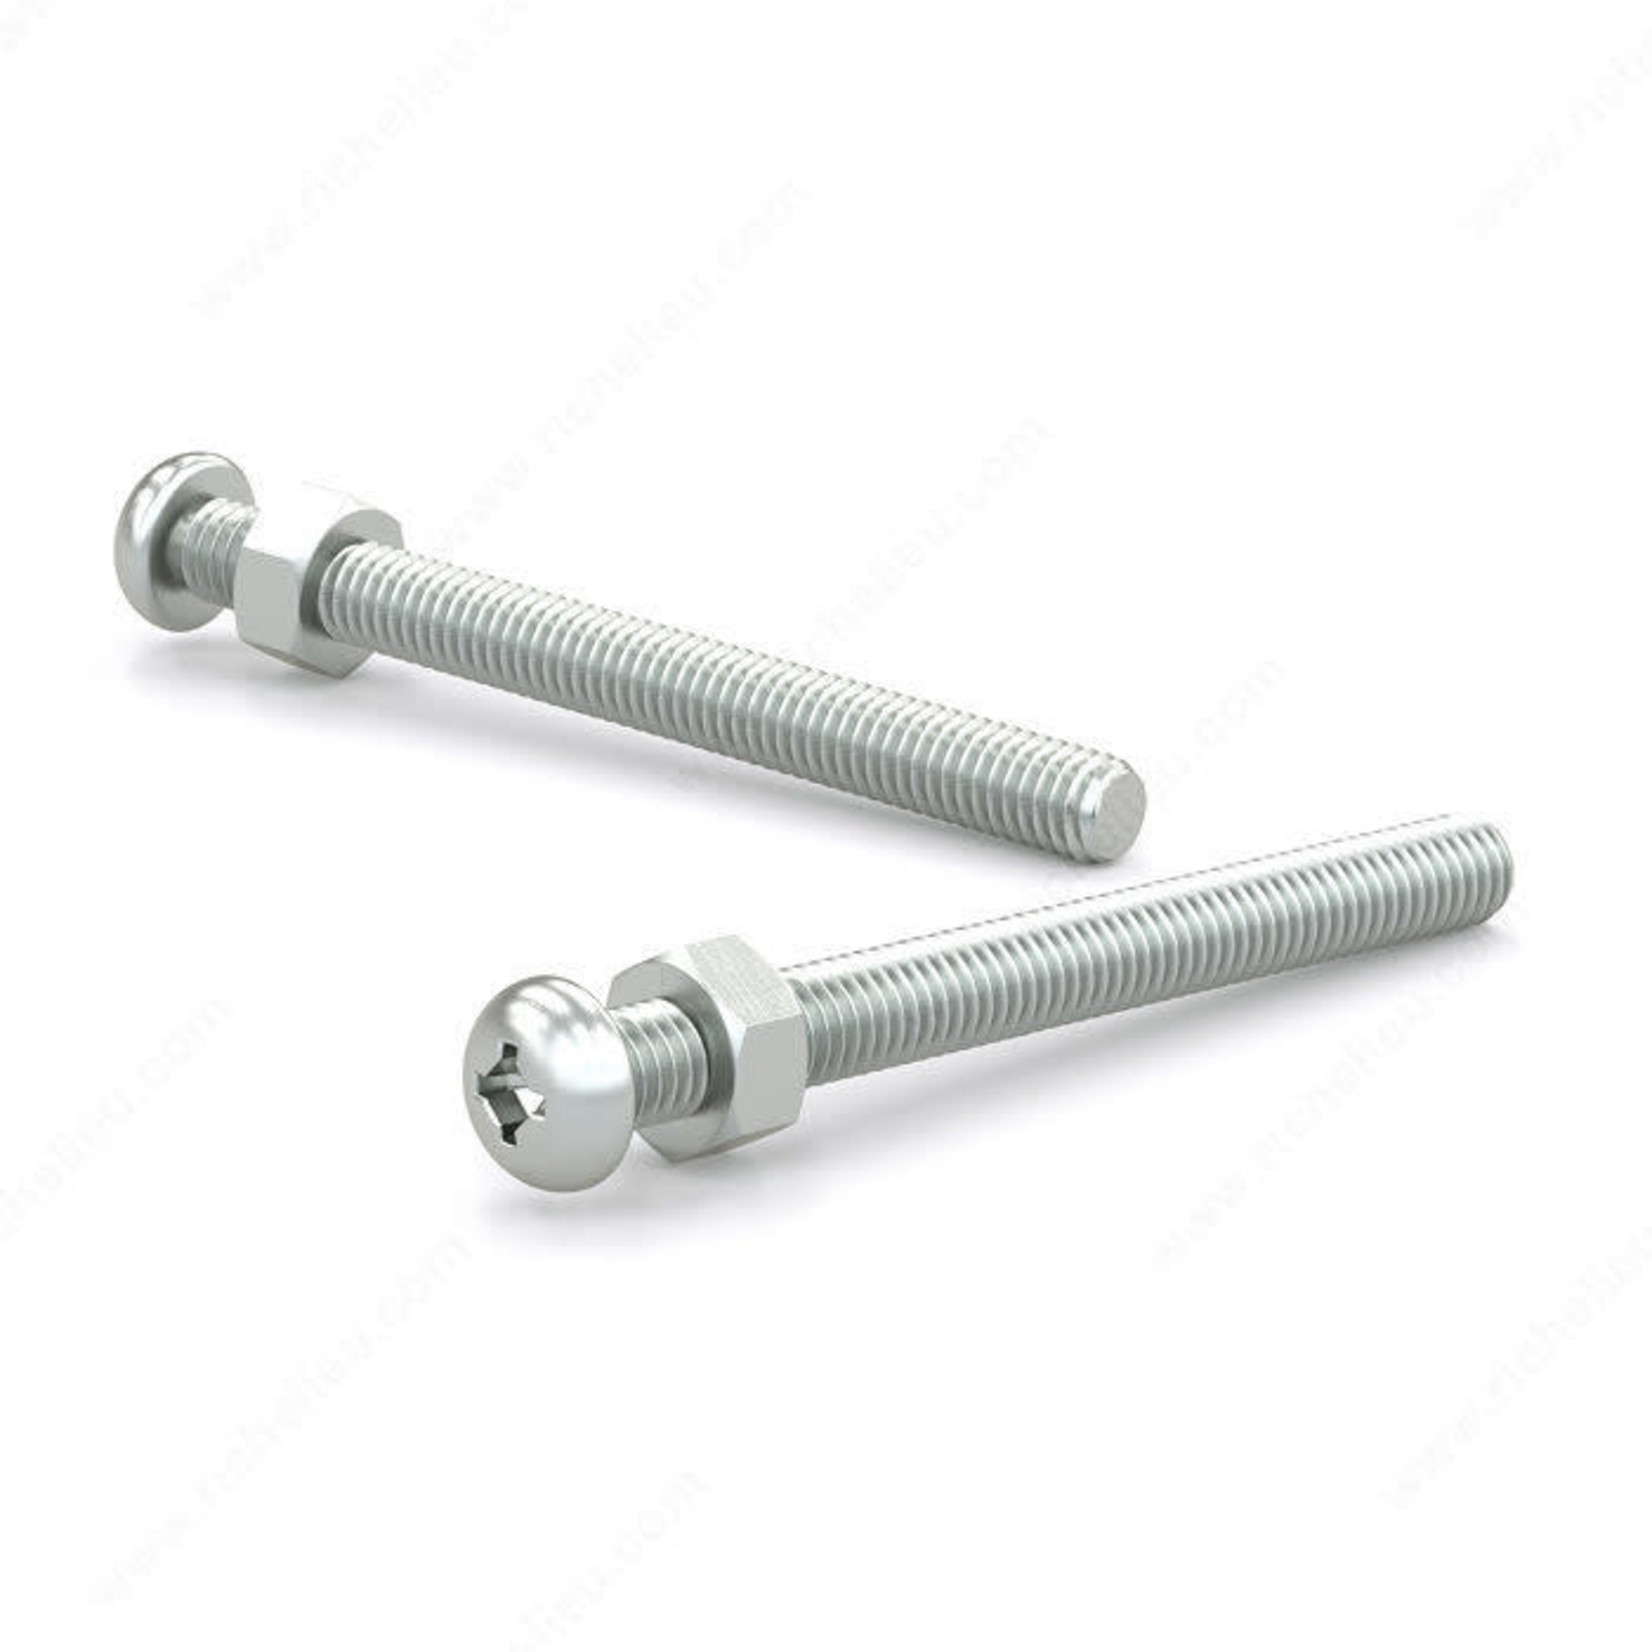 RELIABLE MACHINE SCREW WITH NUT, PAN HEAD, 10-24 2IN, 8PK BLISTER